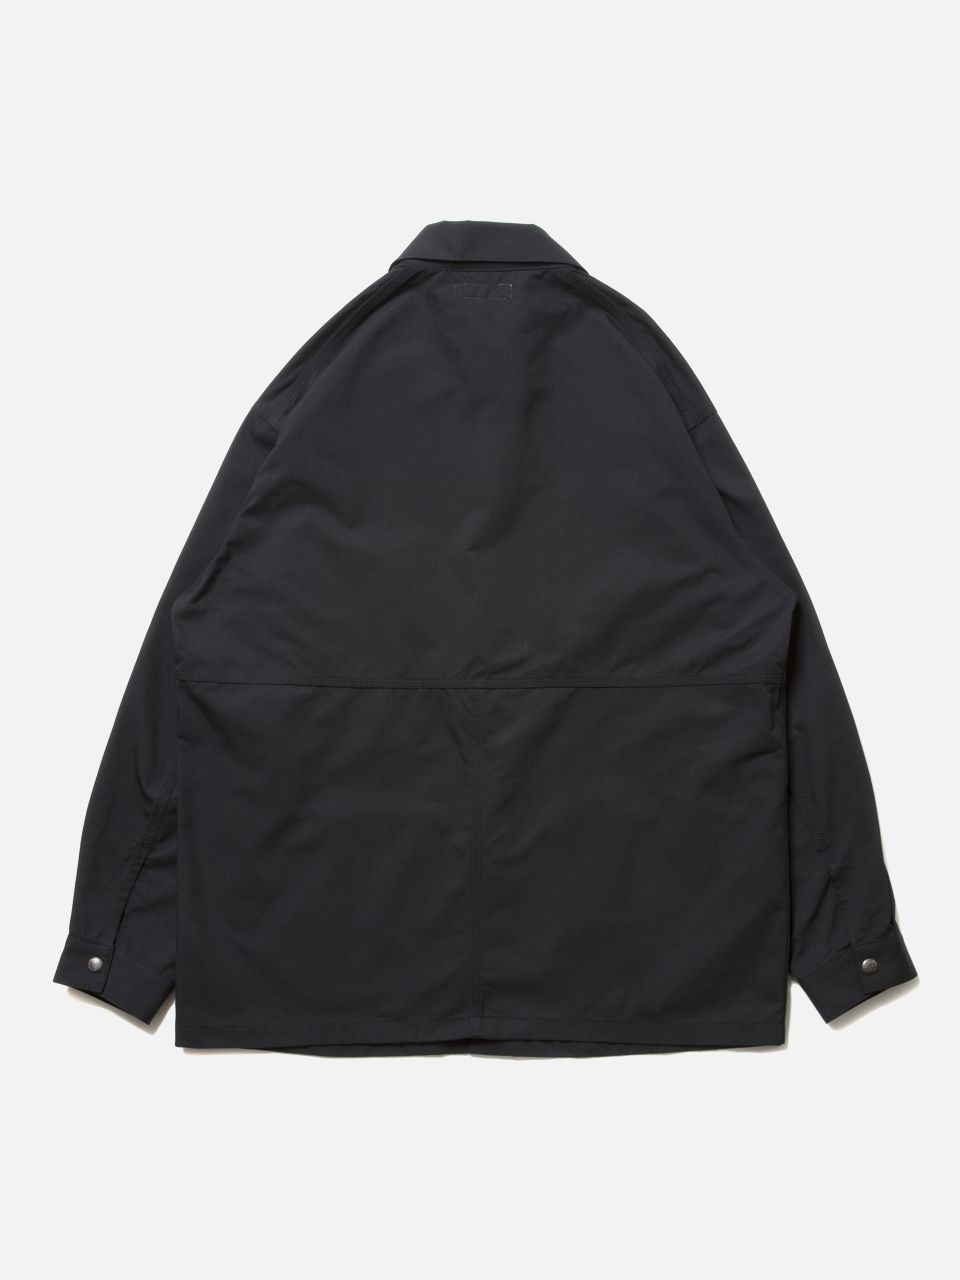 COOTIE クーティ 通販 19SS Cordura Coverall カバーオール